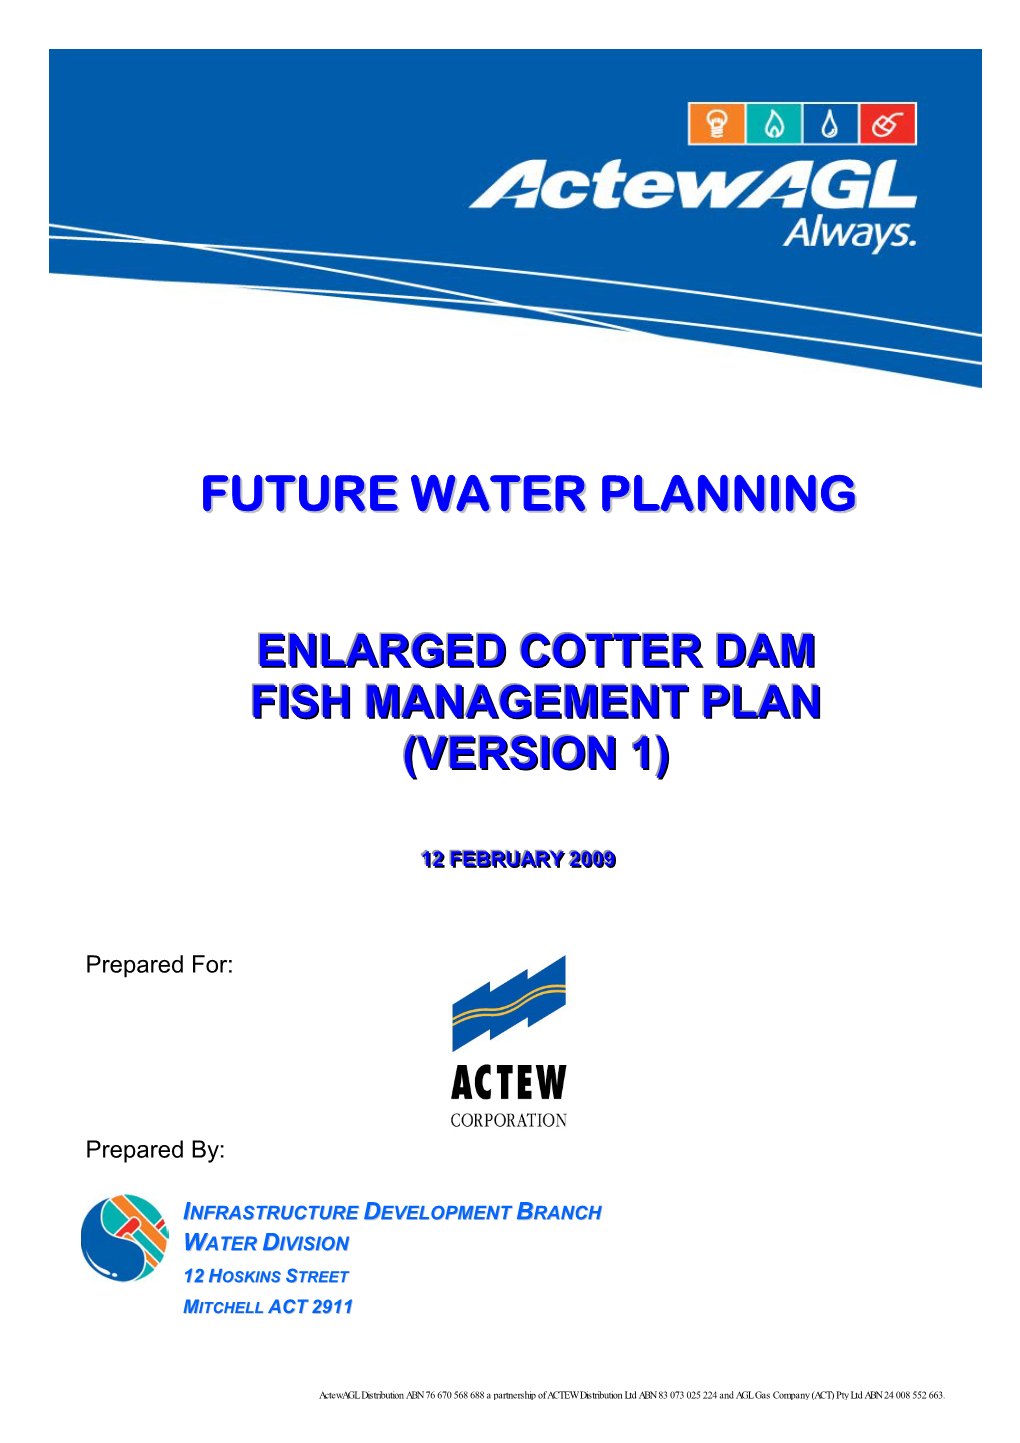 Future Water Planning Enlarged Cotter Dam Fish Management